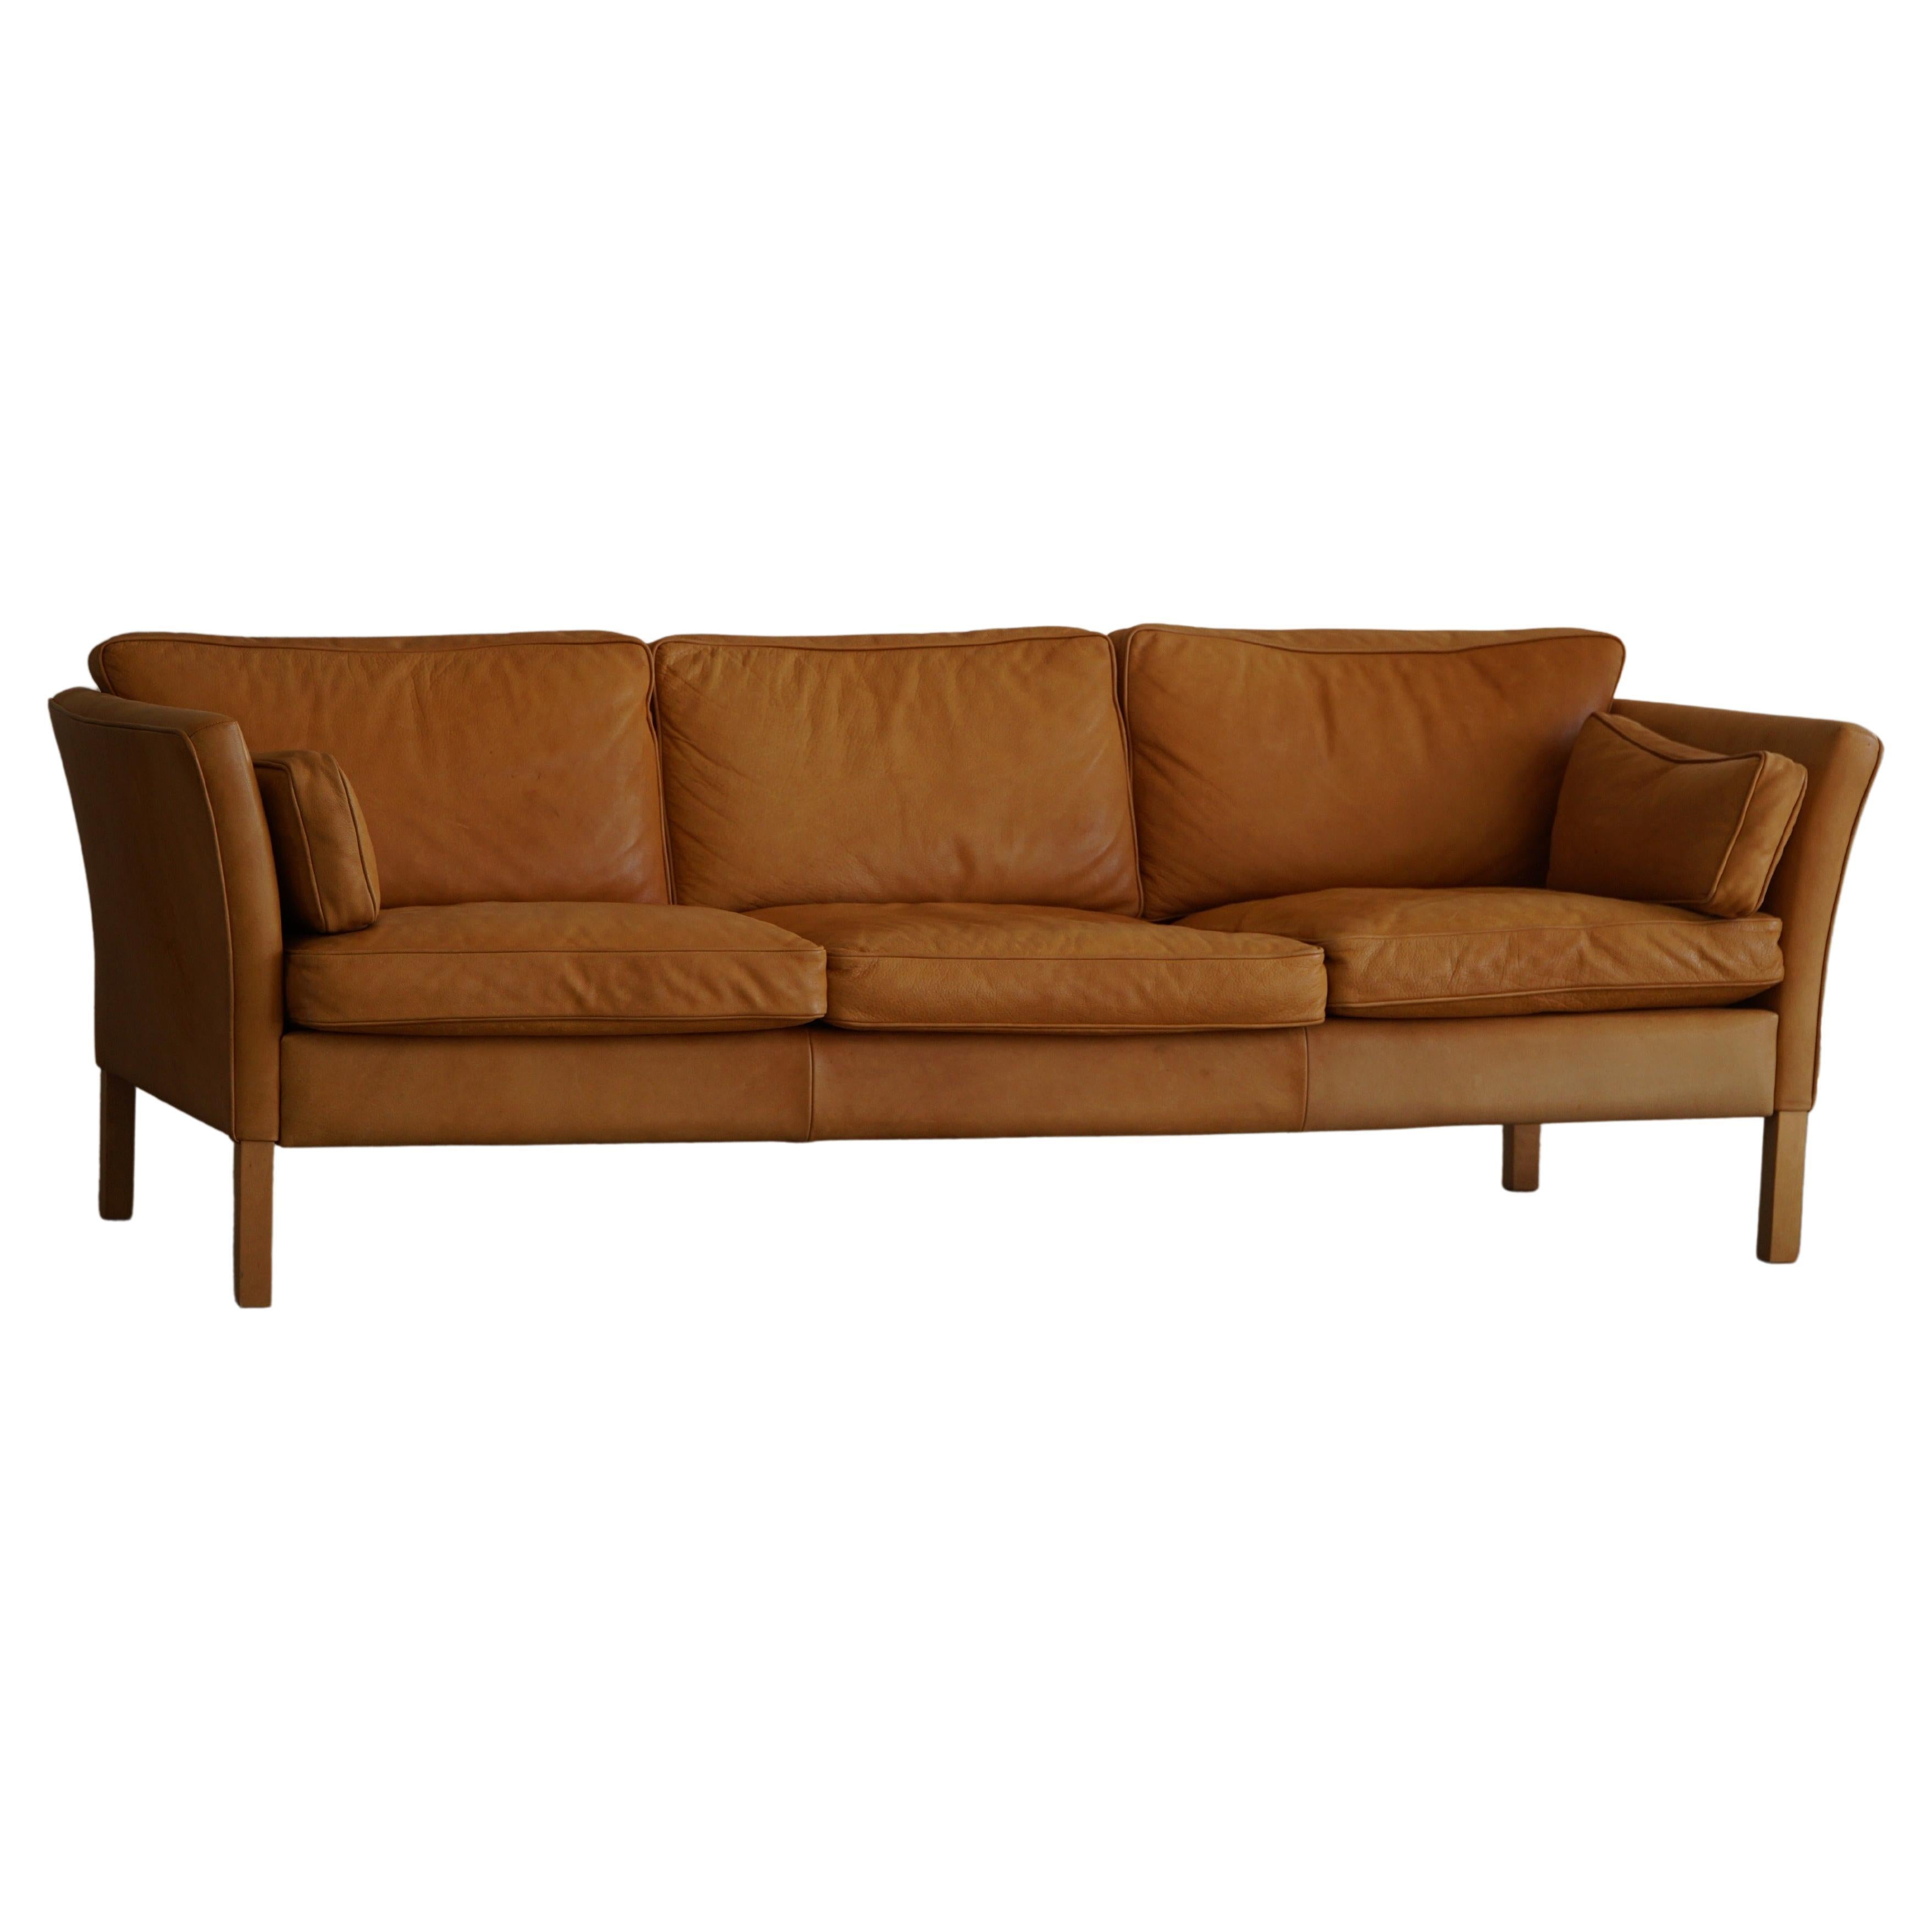 Danish Midcentury Stouby 3-Seater Sofa in Cognac Brown Leather, Made in 1970s For Sale